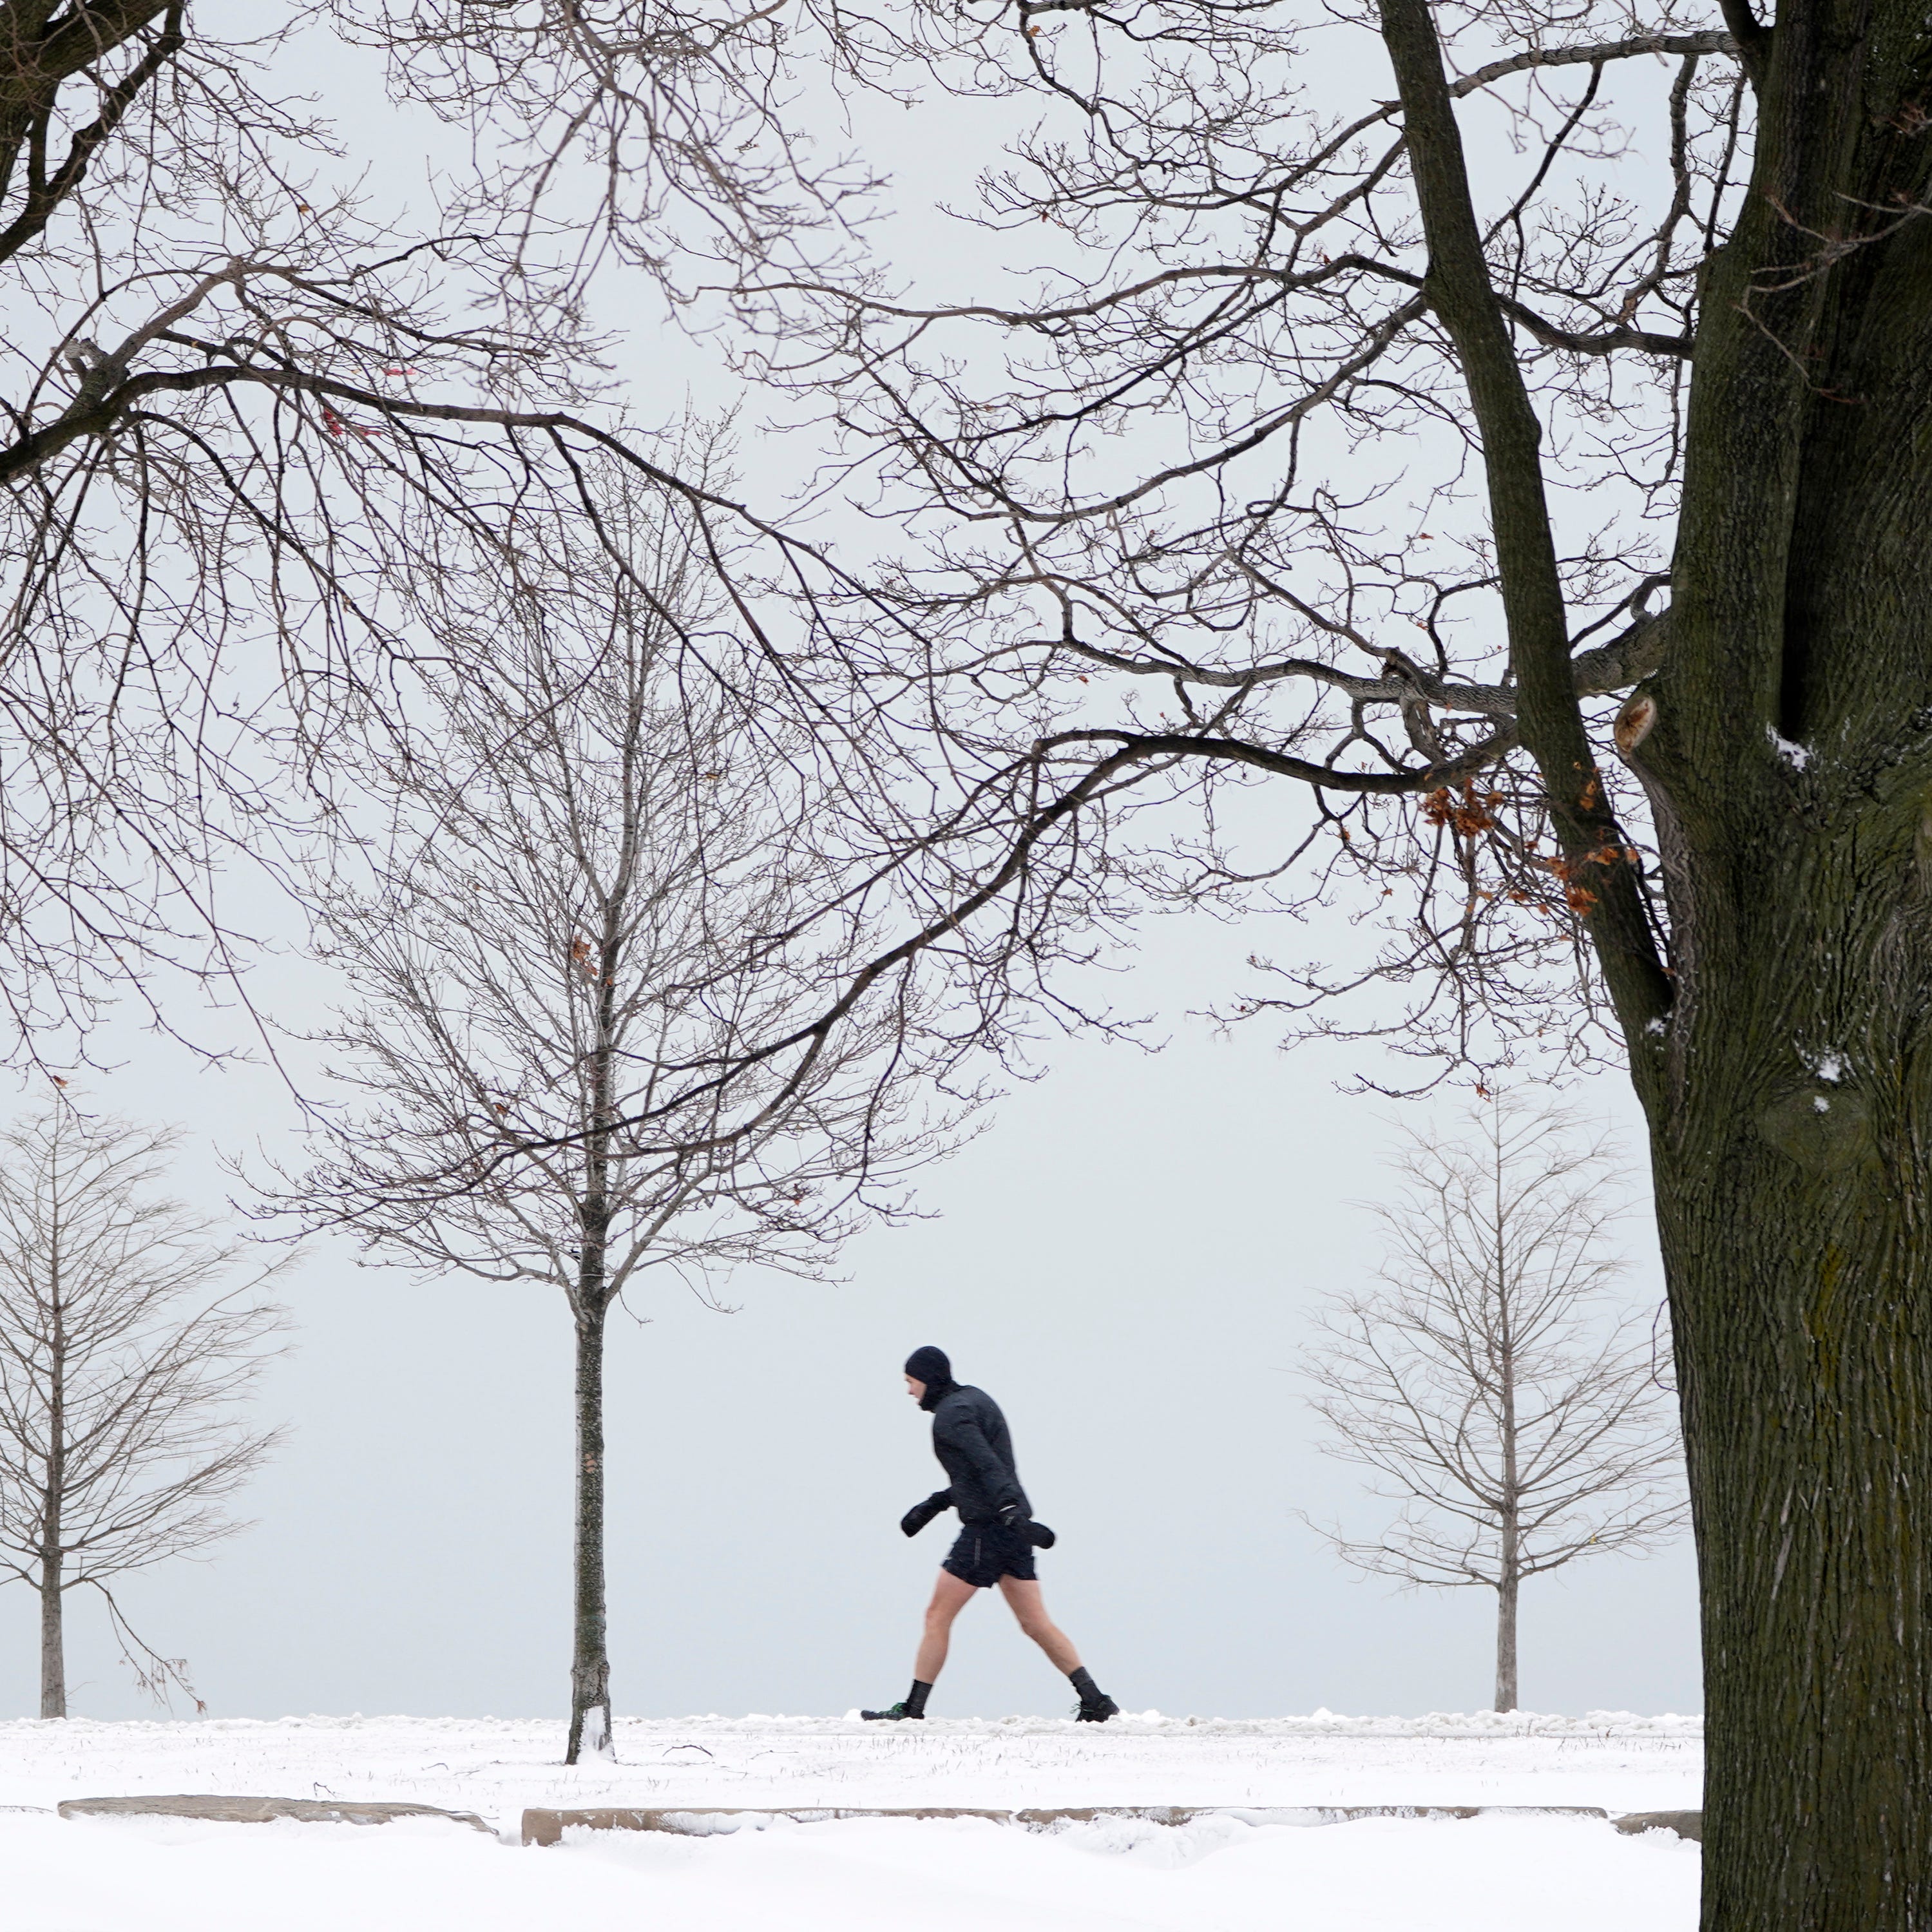 A lone runner leans into a stiff wind near Lake Michigan on the Northside of Chicago Tuesday, Jan. 26, 2021. A major winter storm dumped more than a foot of snow on parts of the middle of the country stretching from central Kansas northeast to Chicago and southern Michigan.